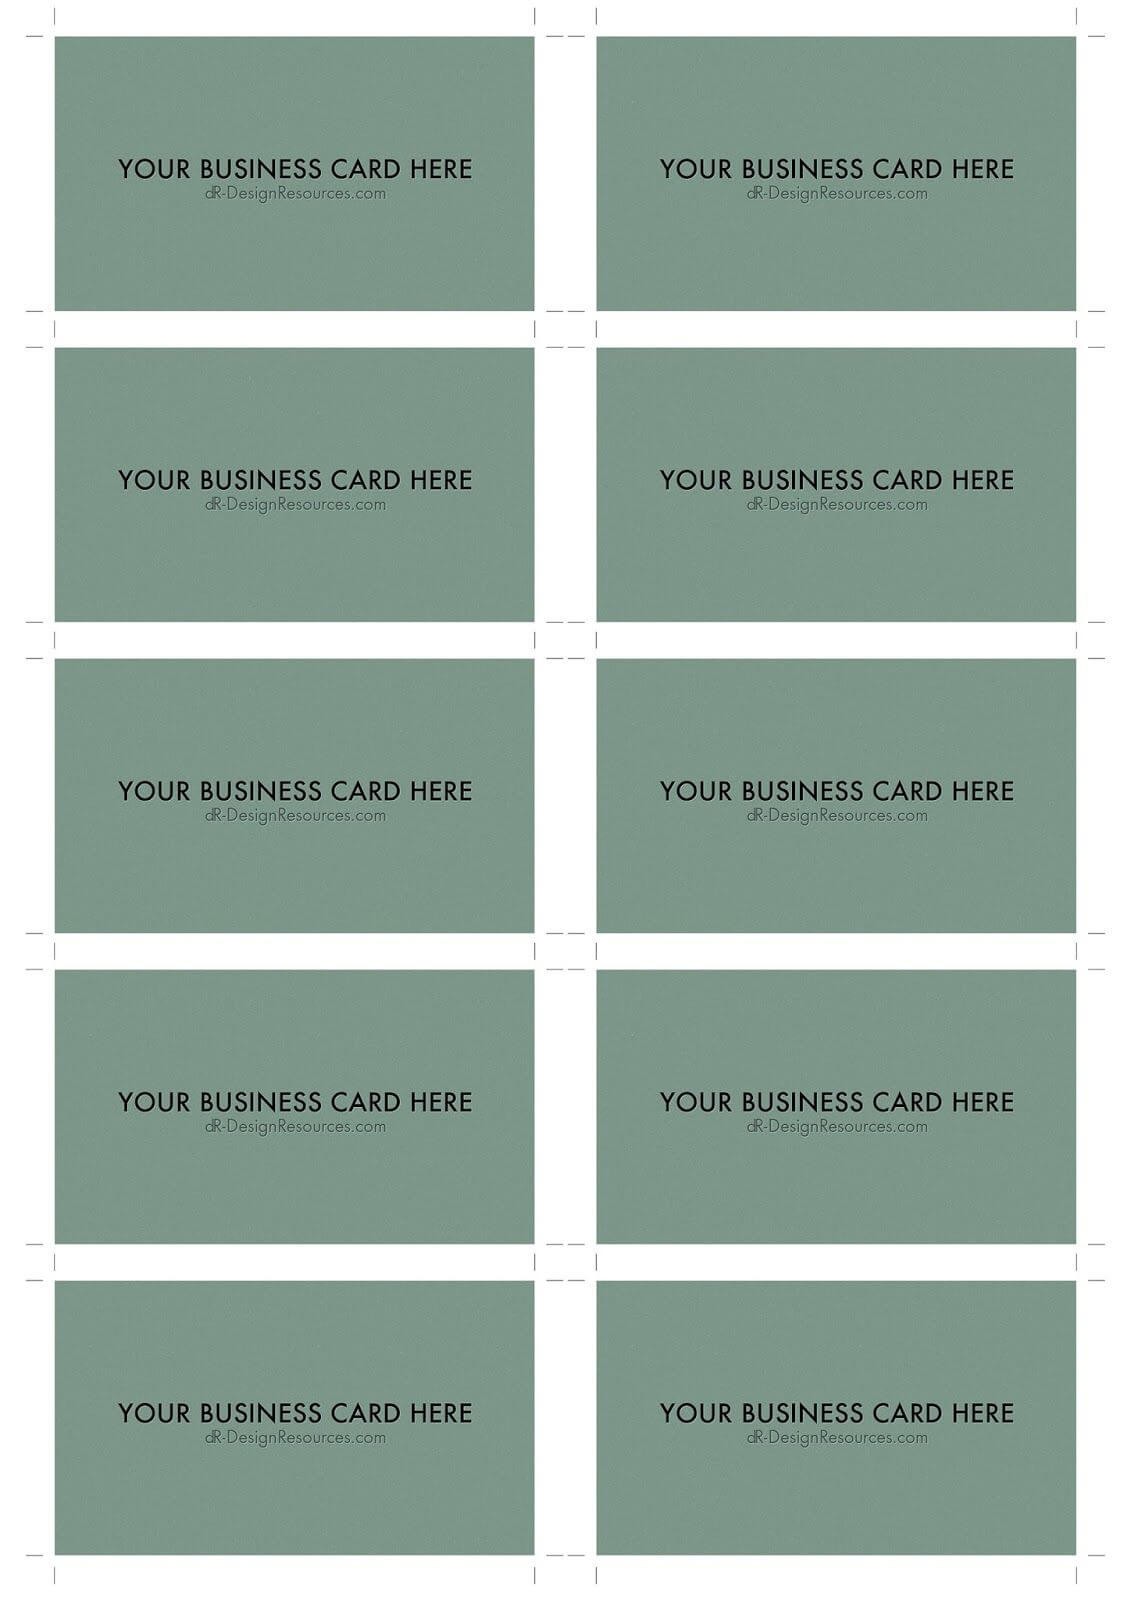 A4 Business Card Template Psd (10 Per Sheet) | Business Card Intended For Visiting Card Templates For Photoshop